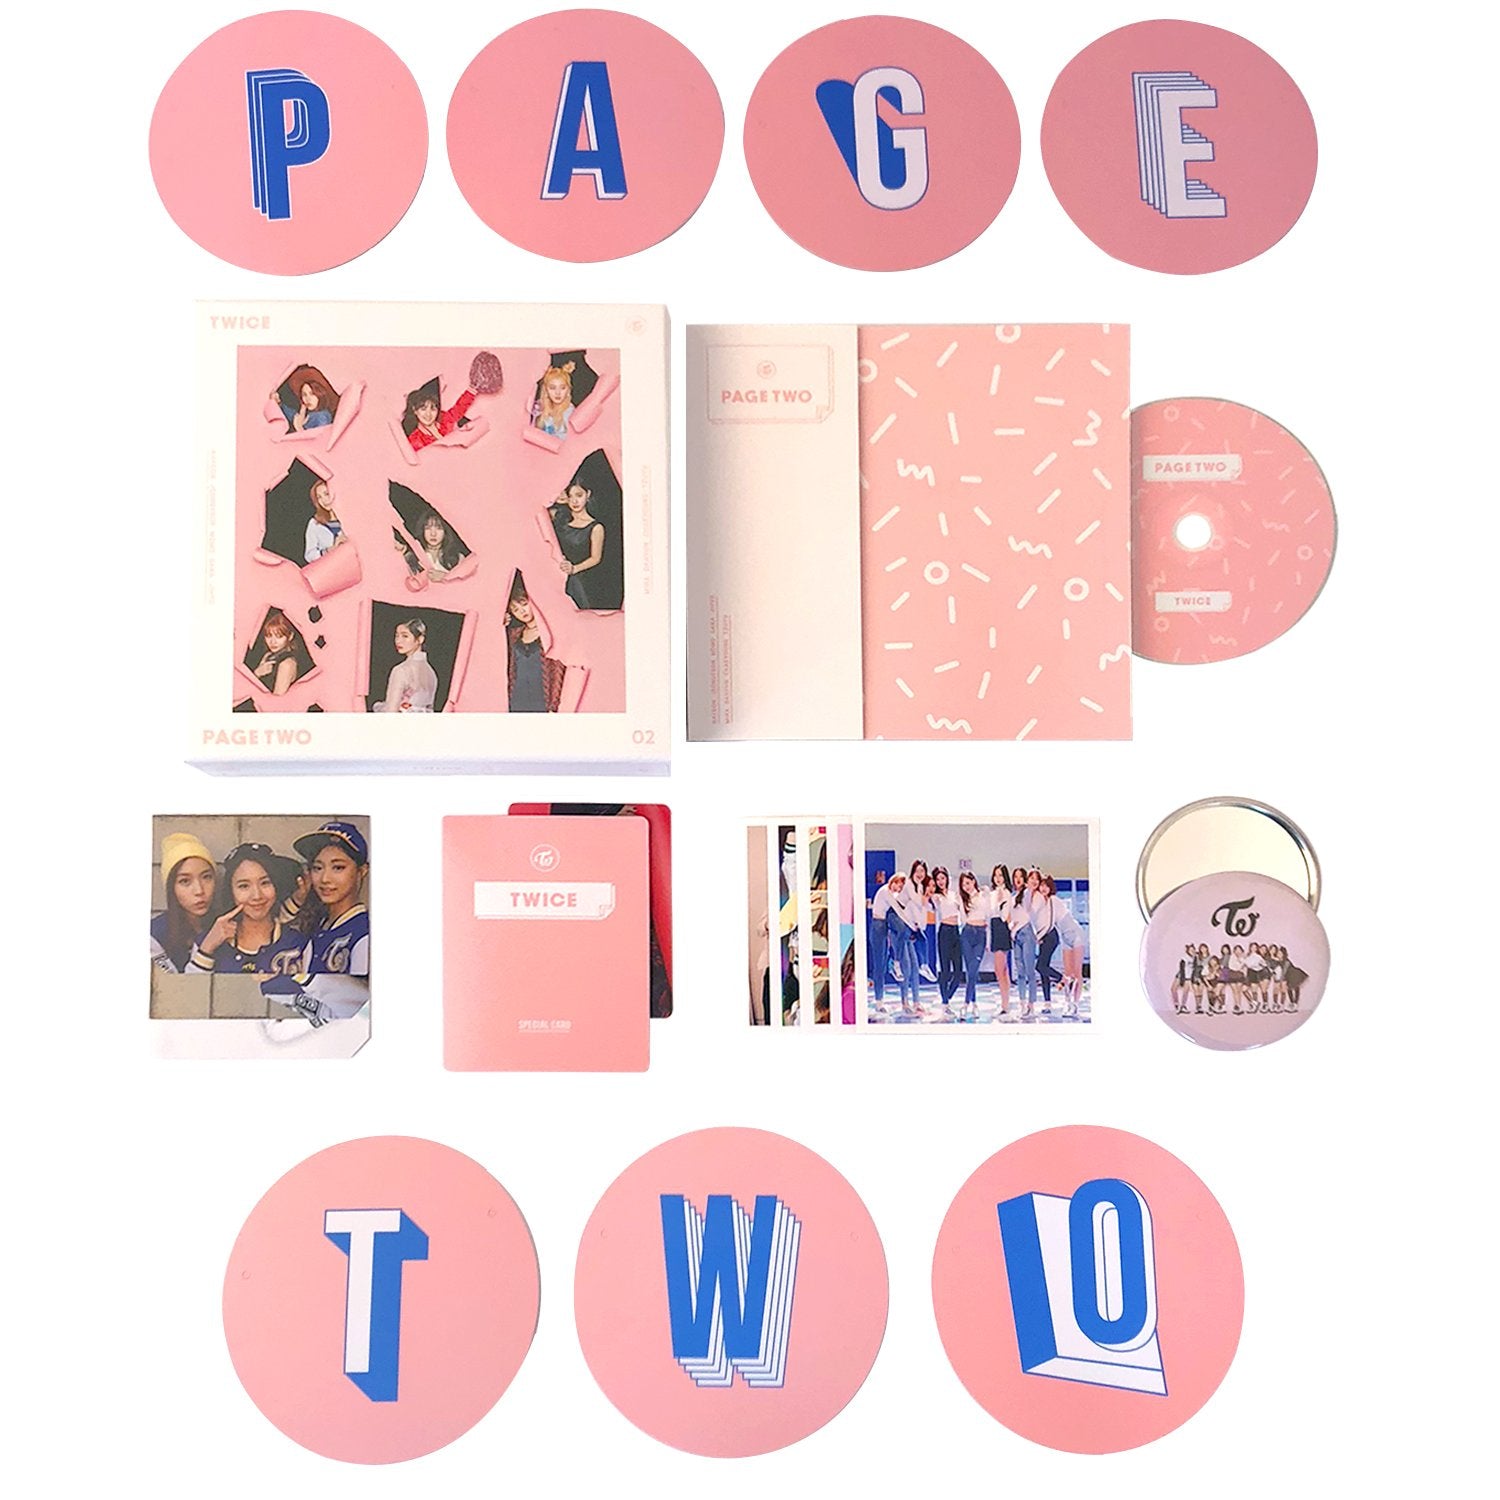 TWICE - PAGE TWO